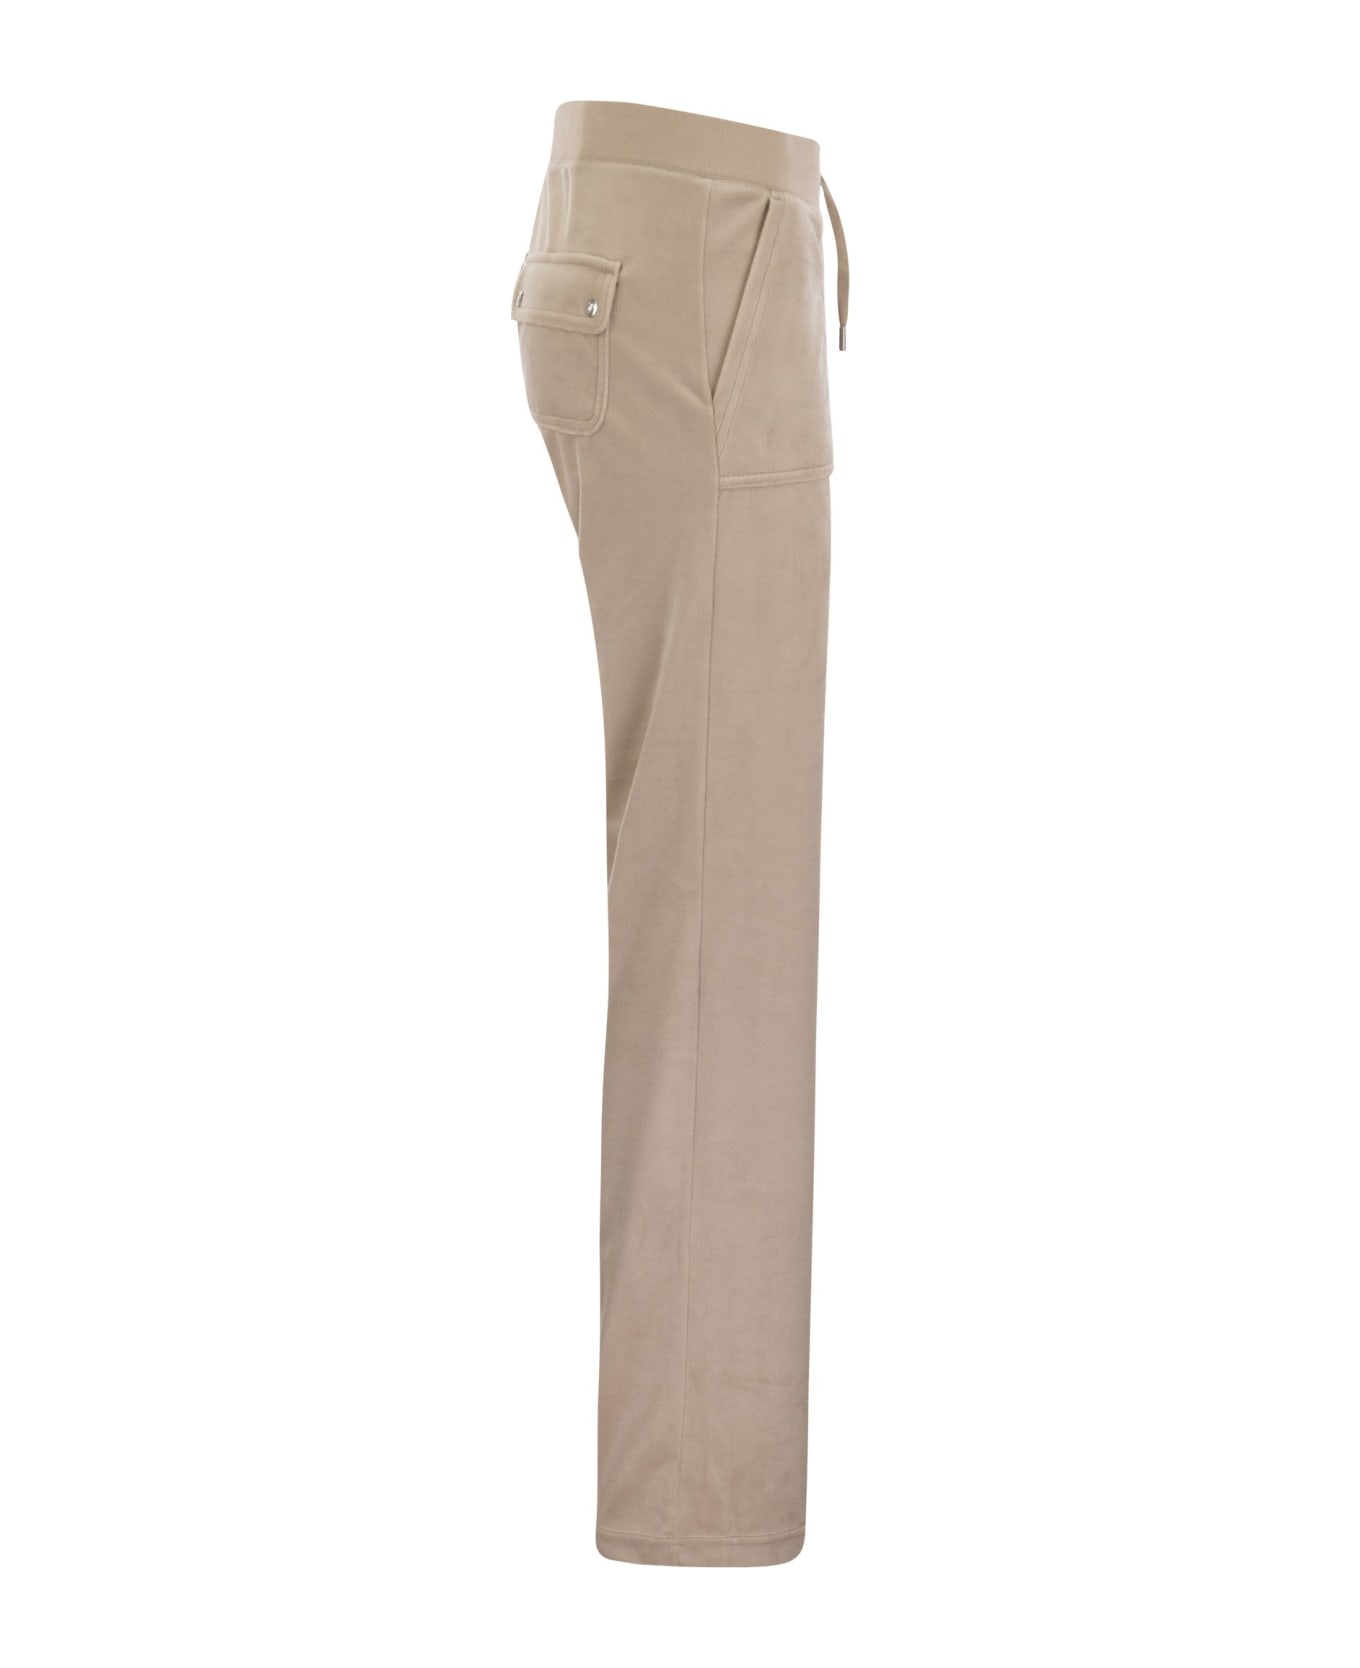 Juicy Couture Trousers With Velour Pockets - Beige ボトムス